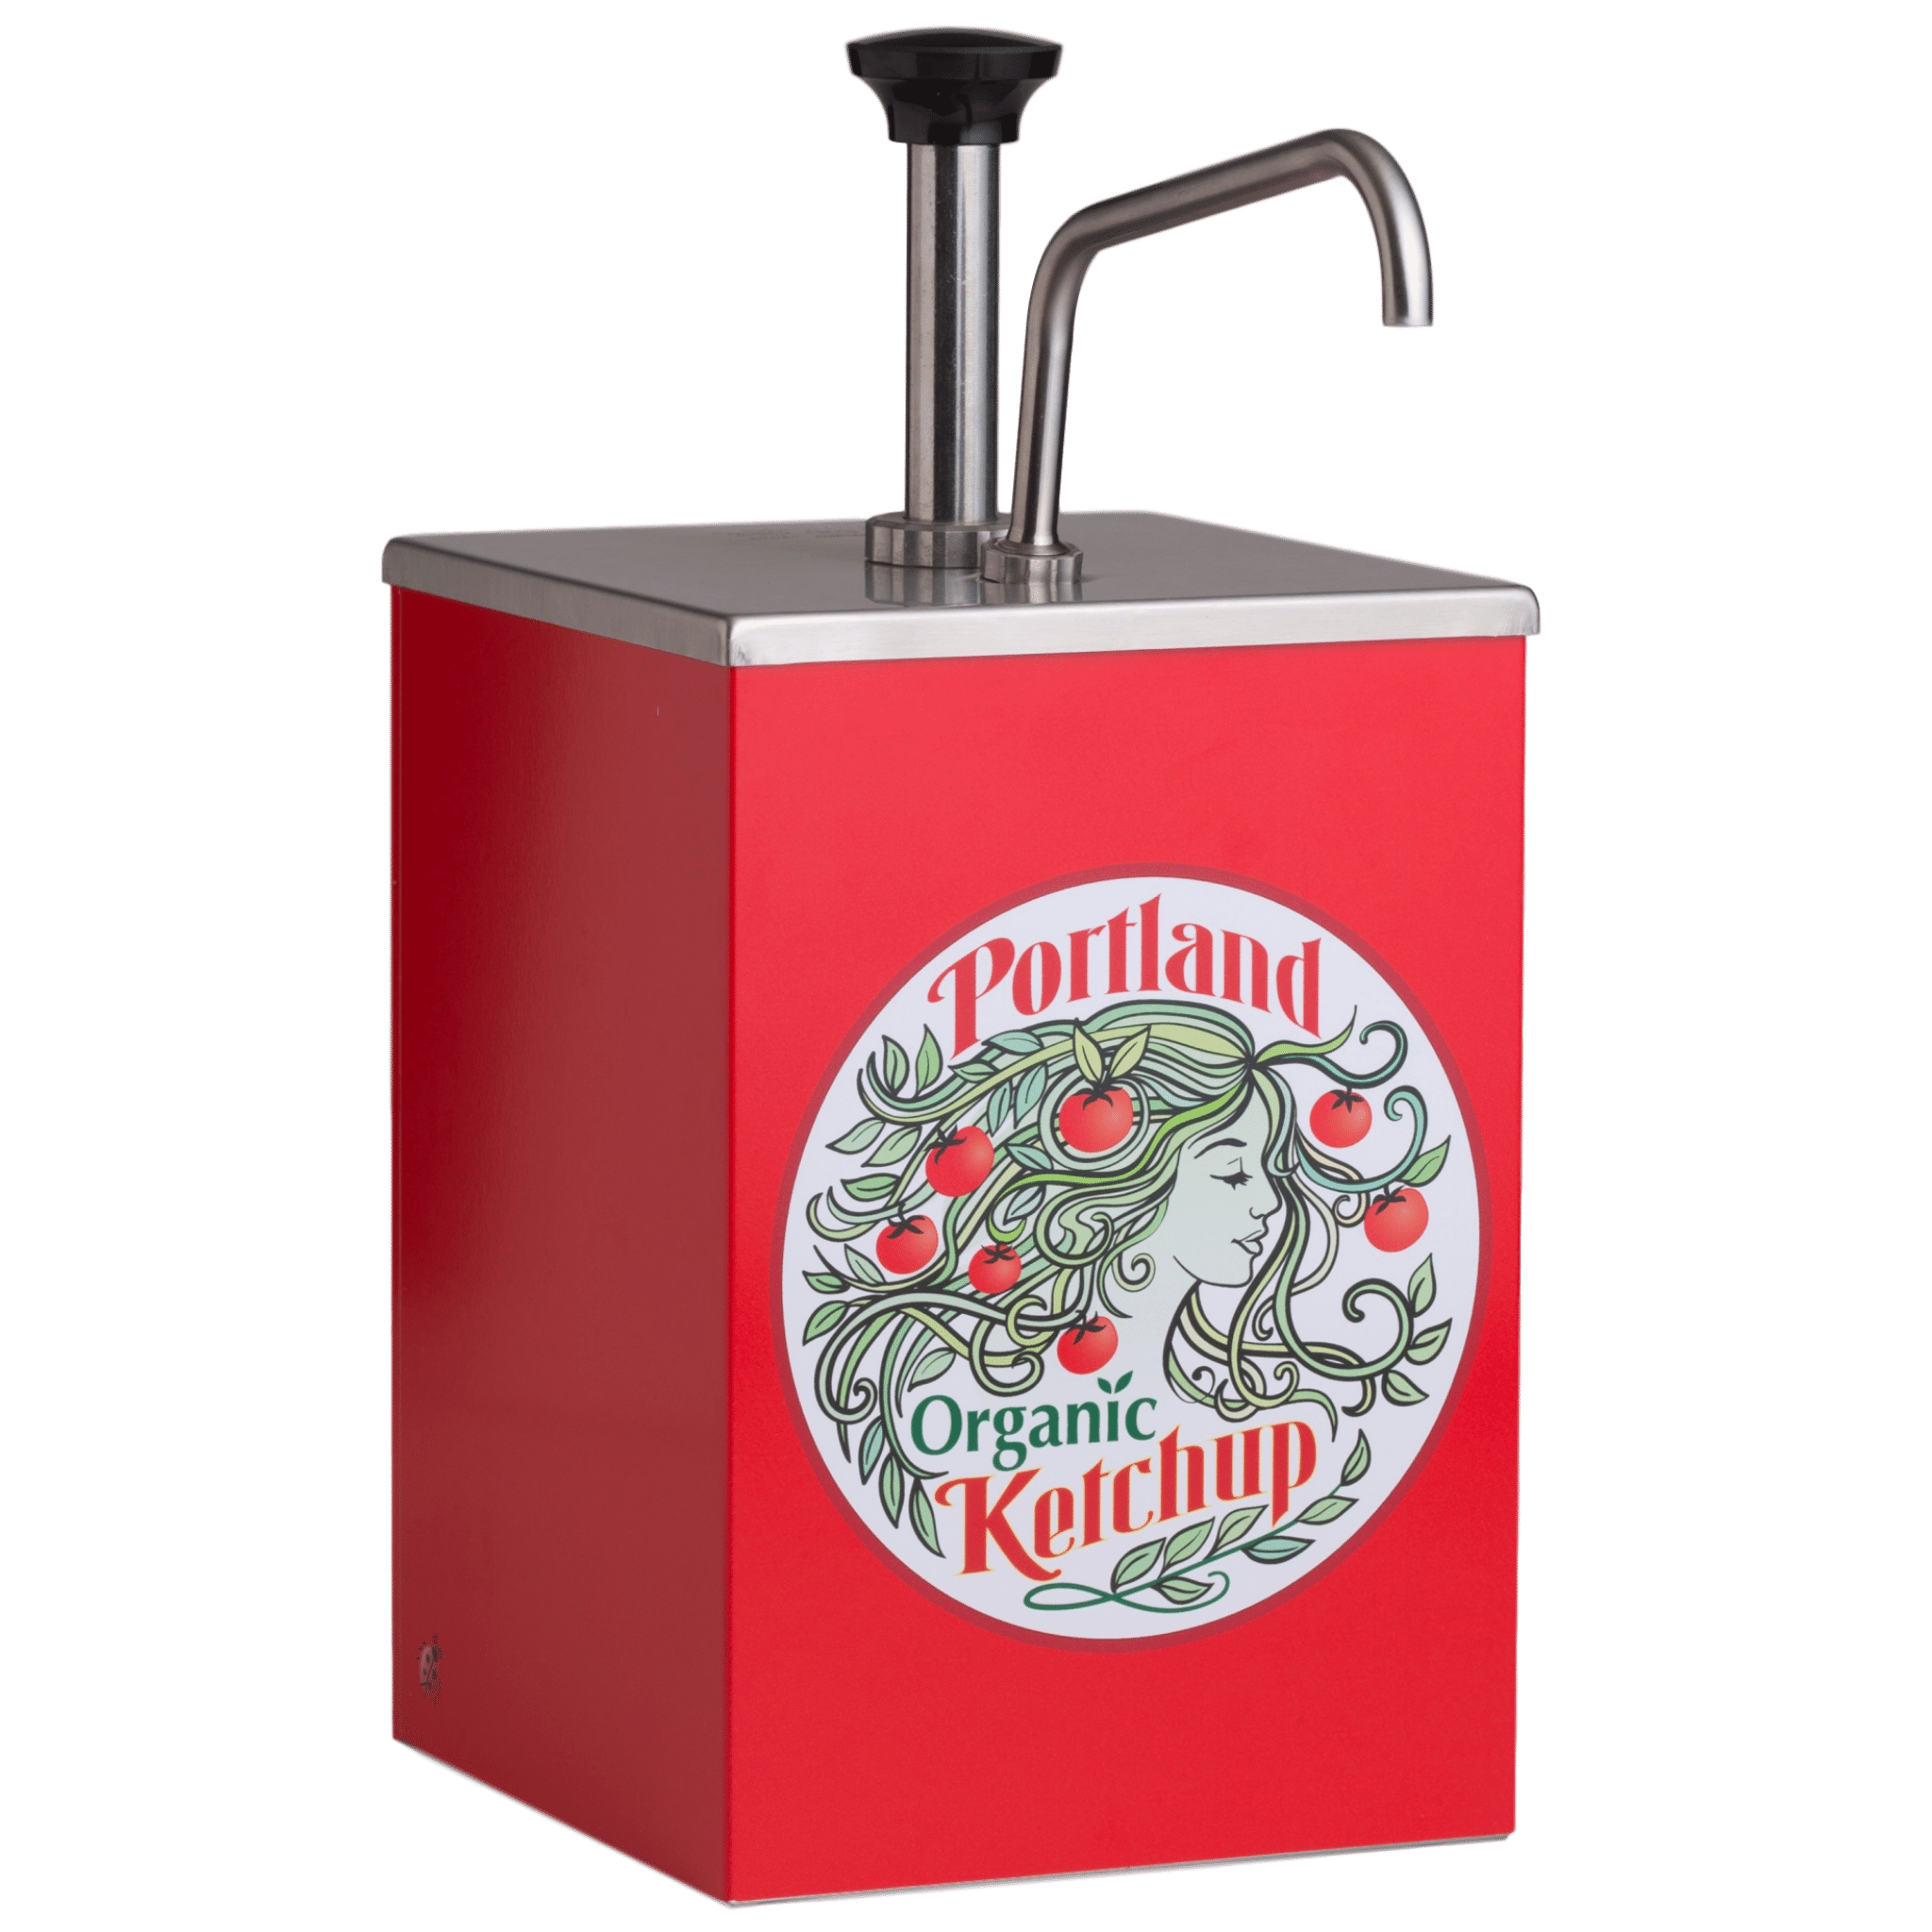 Portland Organic Ketchup Stainless Steel Pump 1 gallon dispenser with Portland Organic Ketchup Label on the front, restaurant supply, non GMO, Dairy Free, Gluten Free, condiments